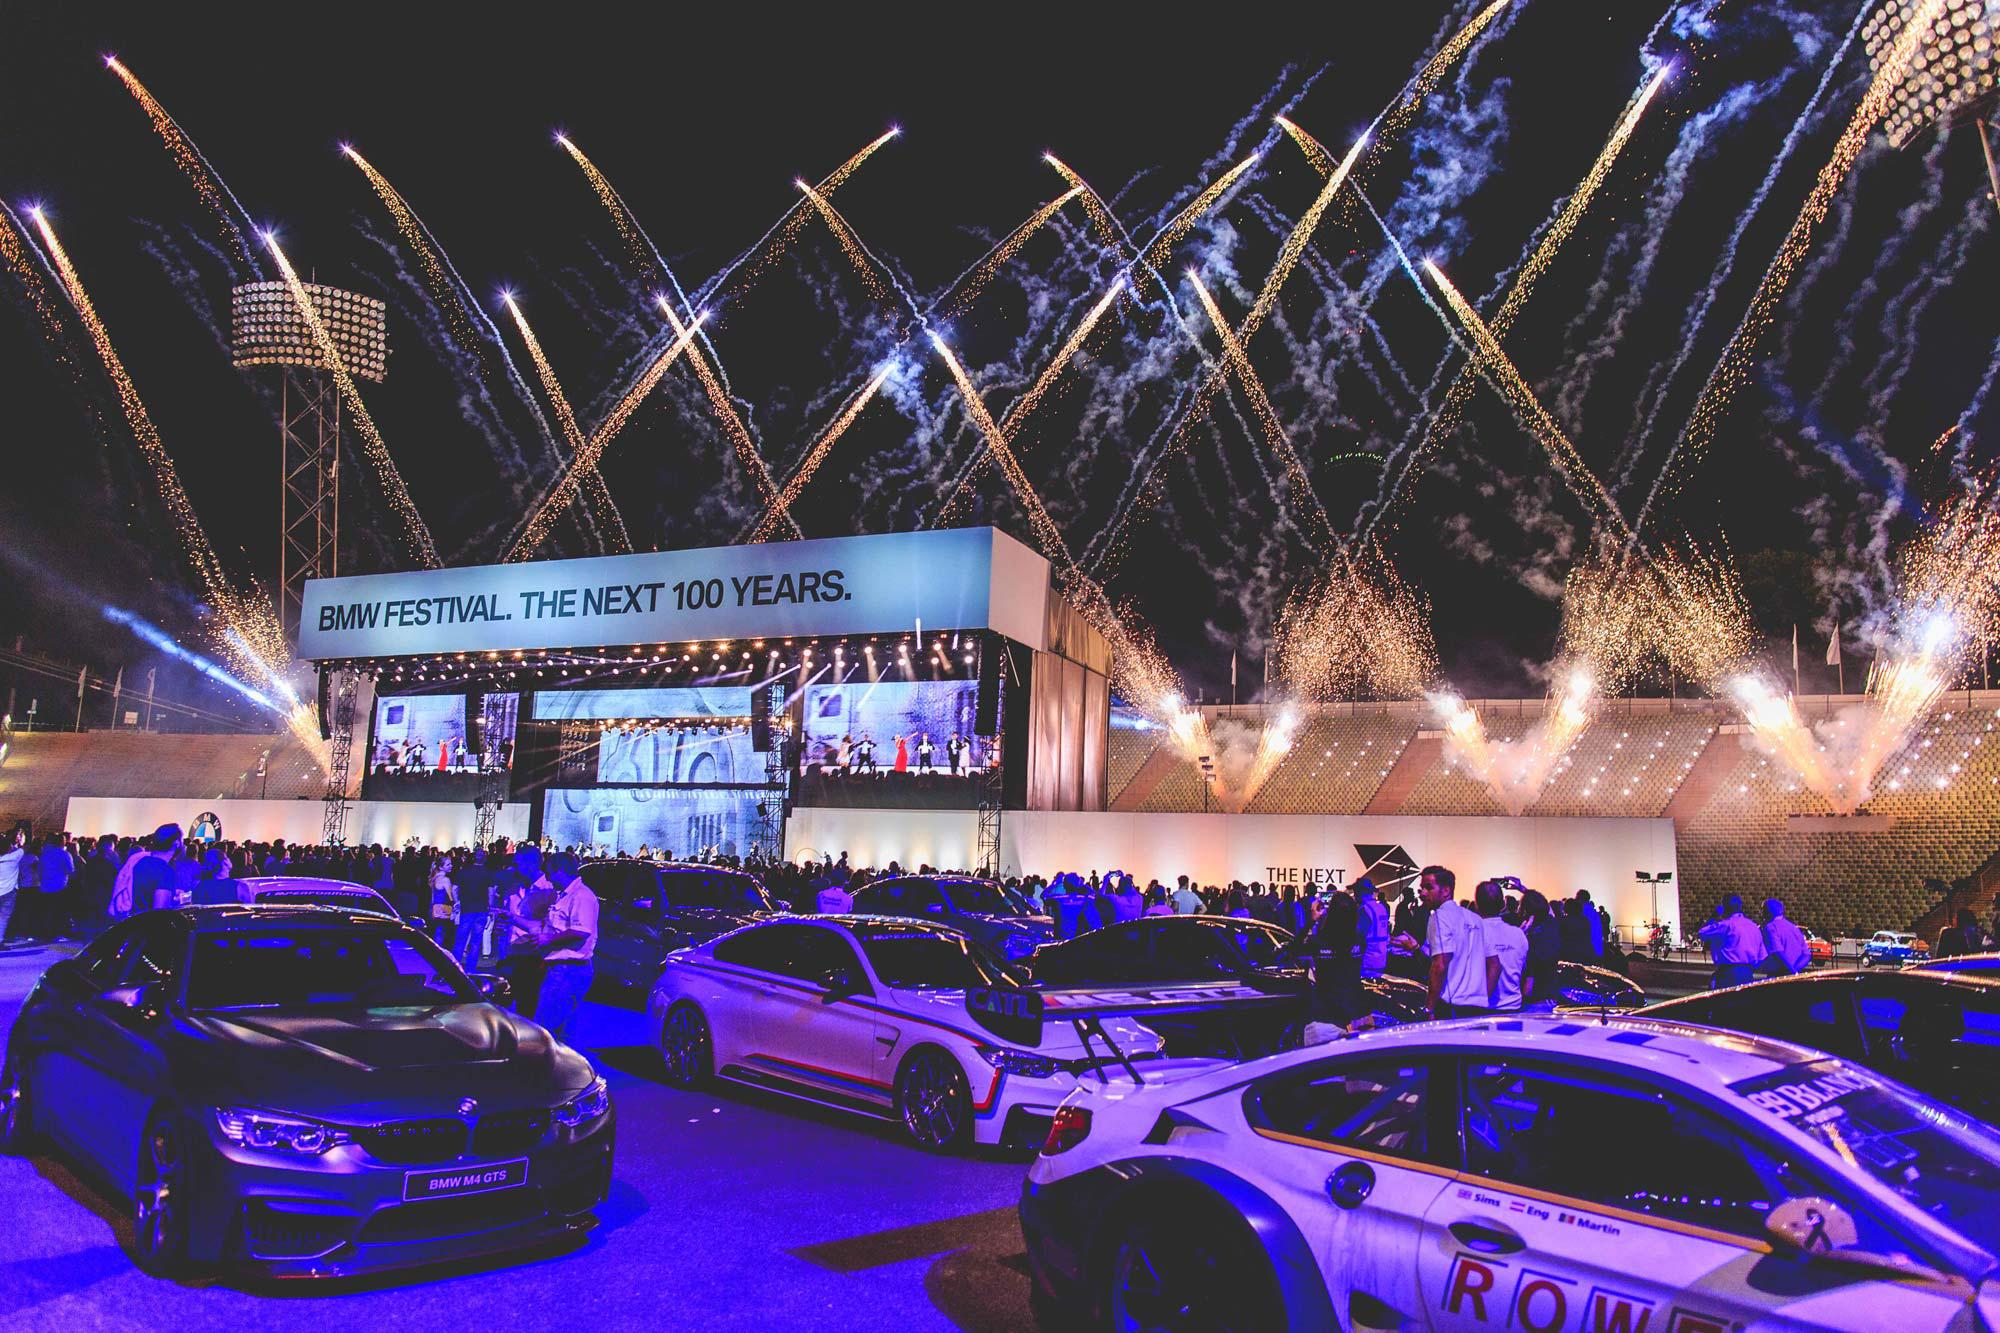 A fleet of BMWs and a crowd behind them. Fireworks burst into the sky and a large stage has a sign that says "BMW FESTIVAL. THE NEXT 100 YEARS." on it.